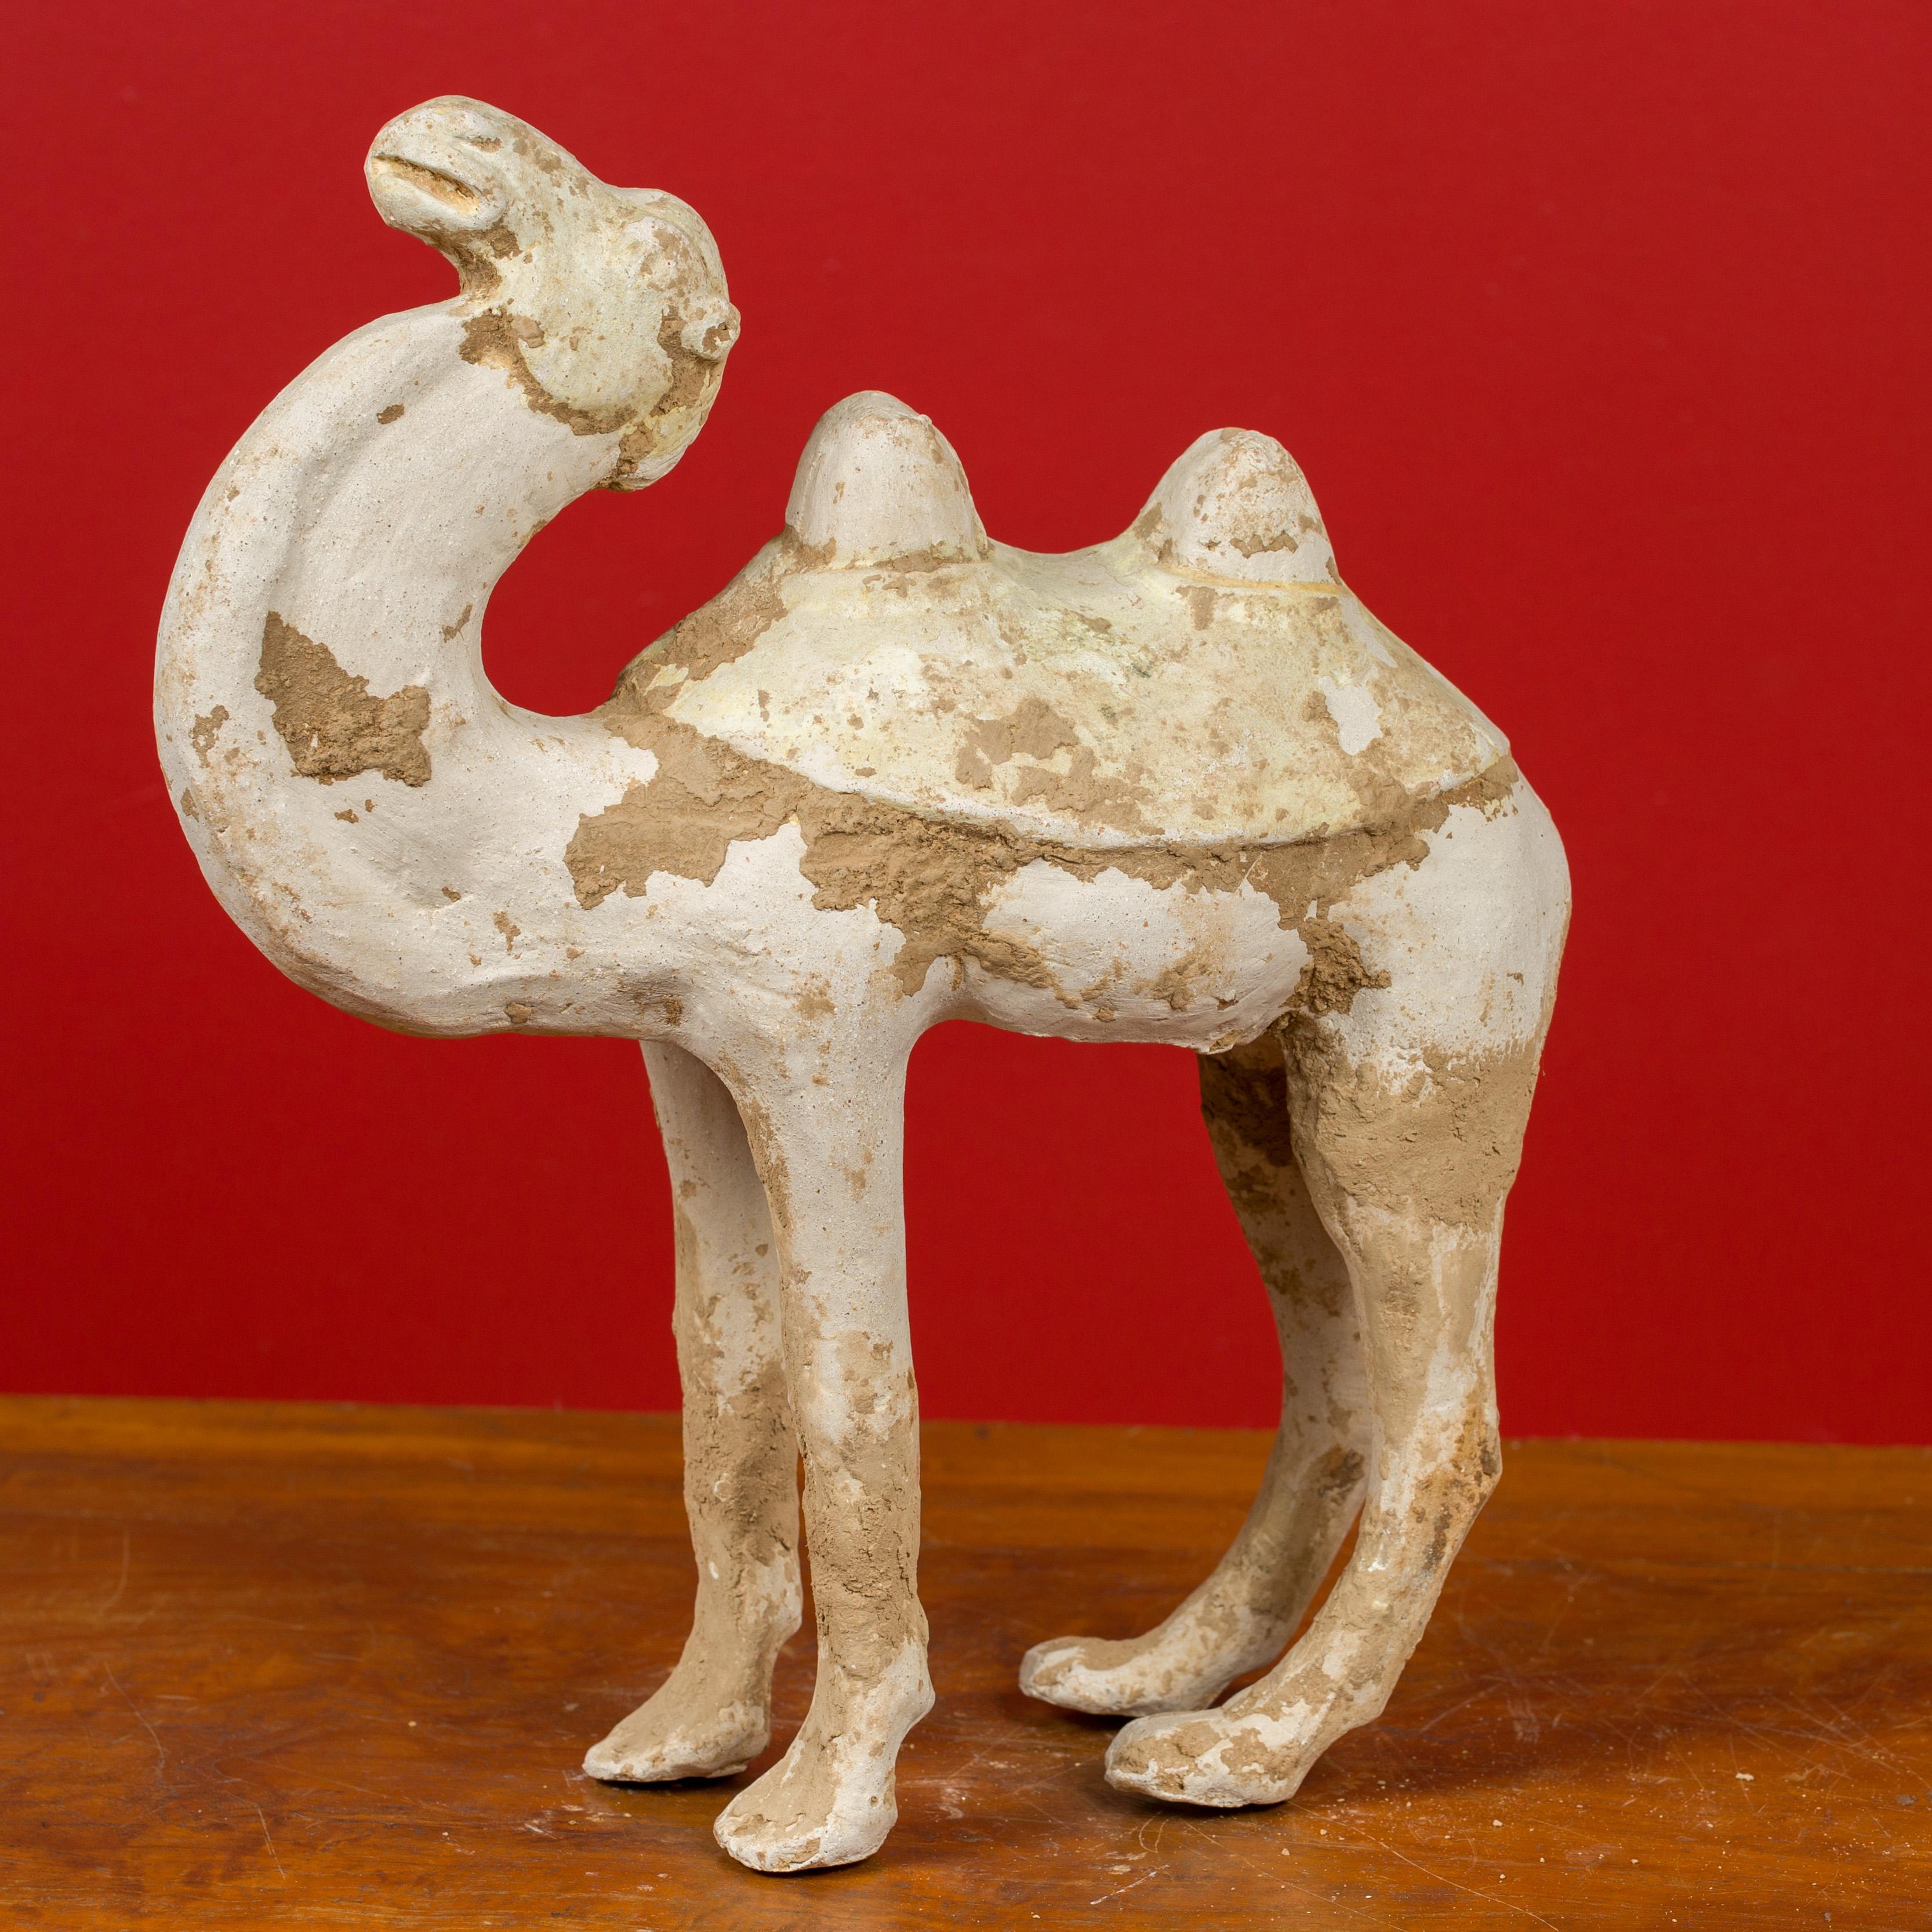 A Chinese Han Dynasty period mingqi terracotta camel circa 202 BC-200 AD, with mineral deposits. Created in China during the Han Dynasty, this mingqi, a funerary statue created to be buried with the deceased to secure an enjoyable afterlife,